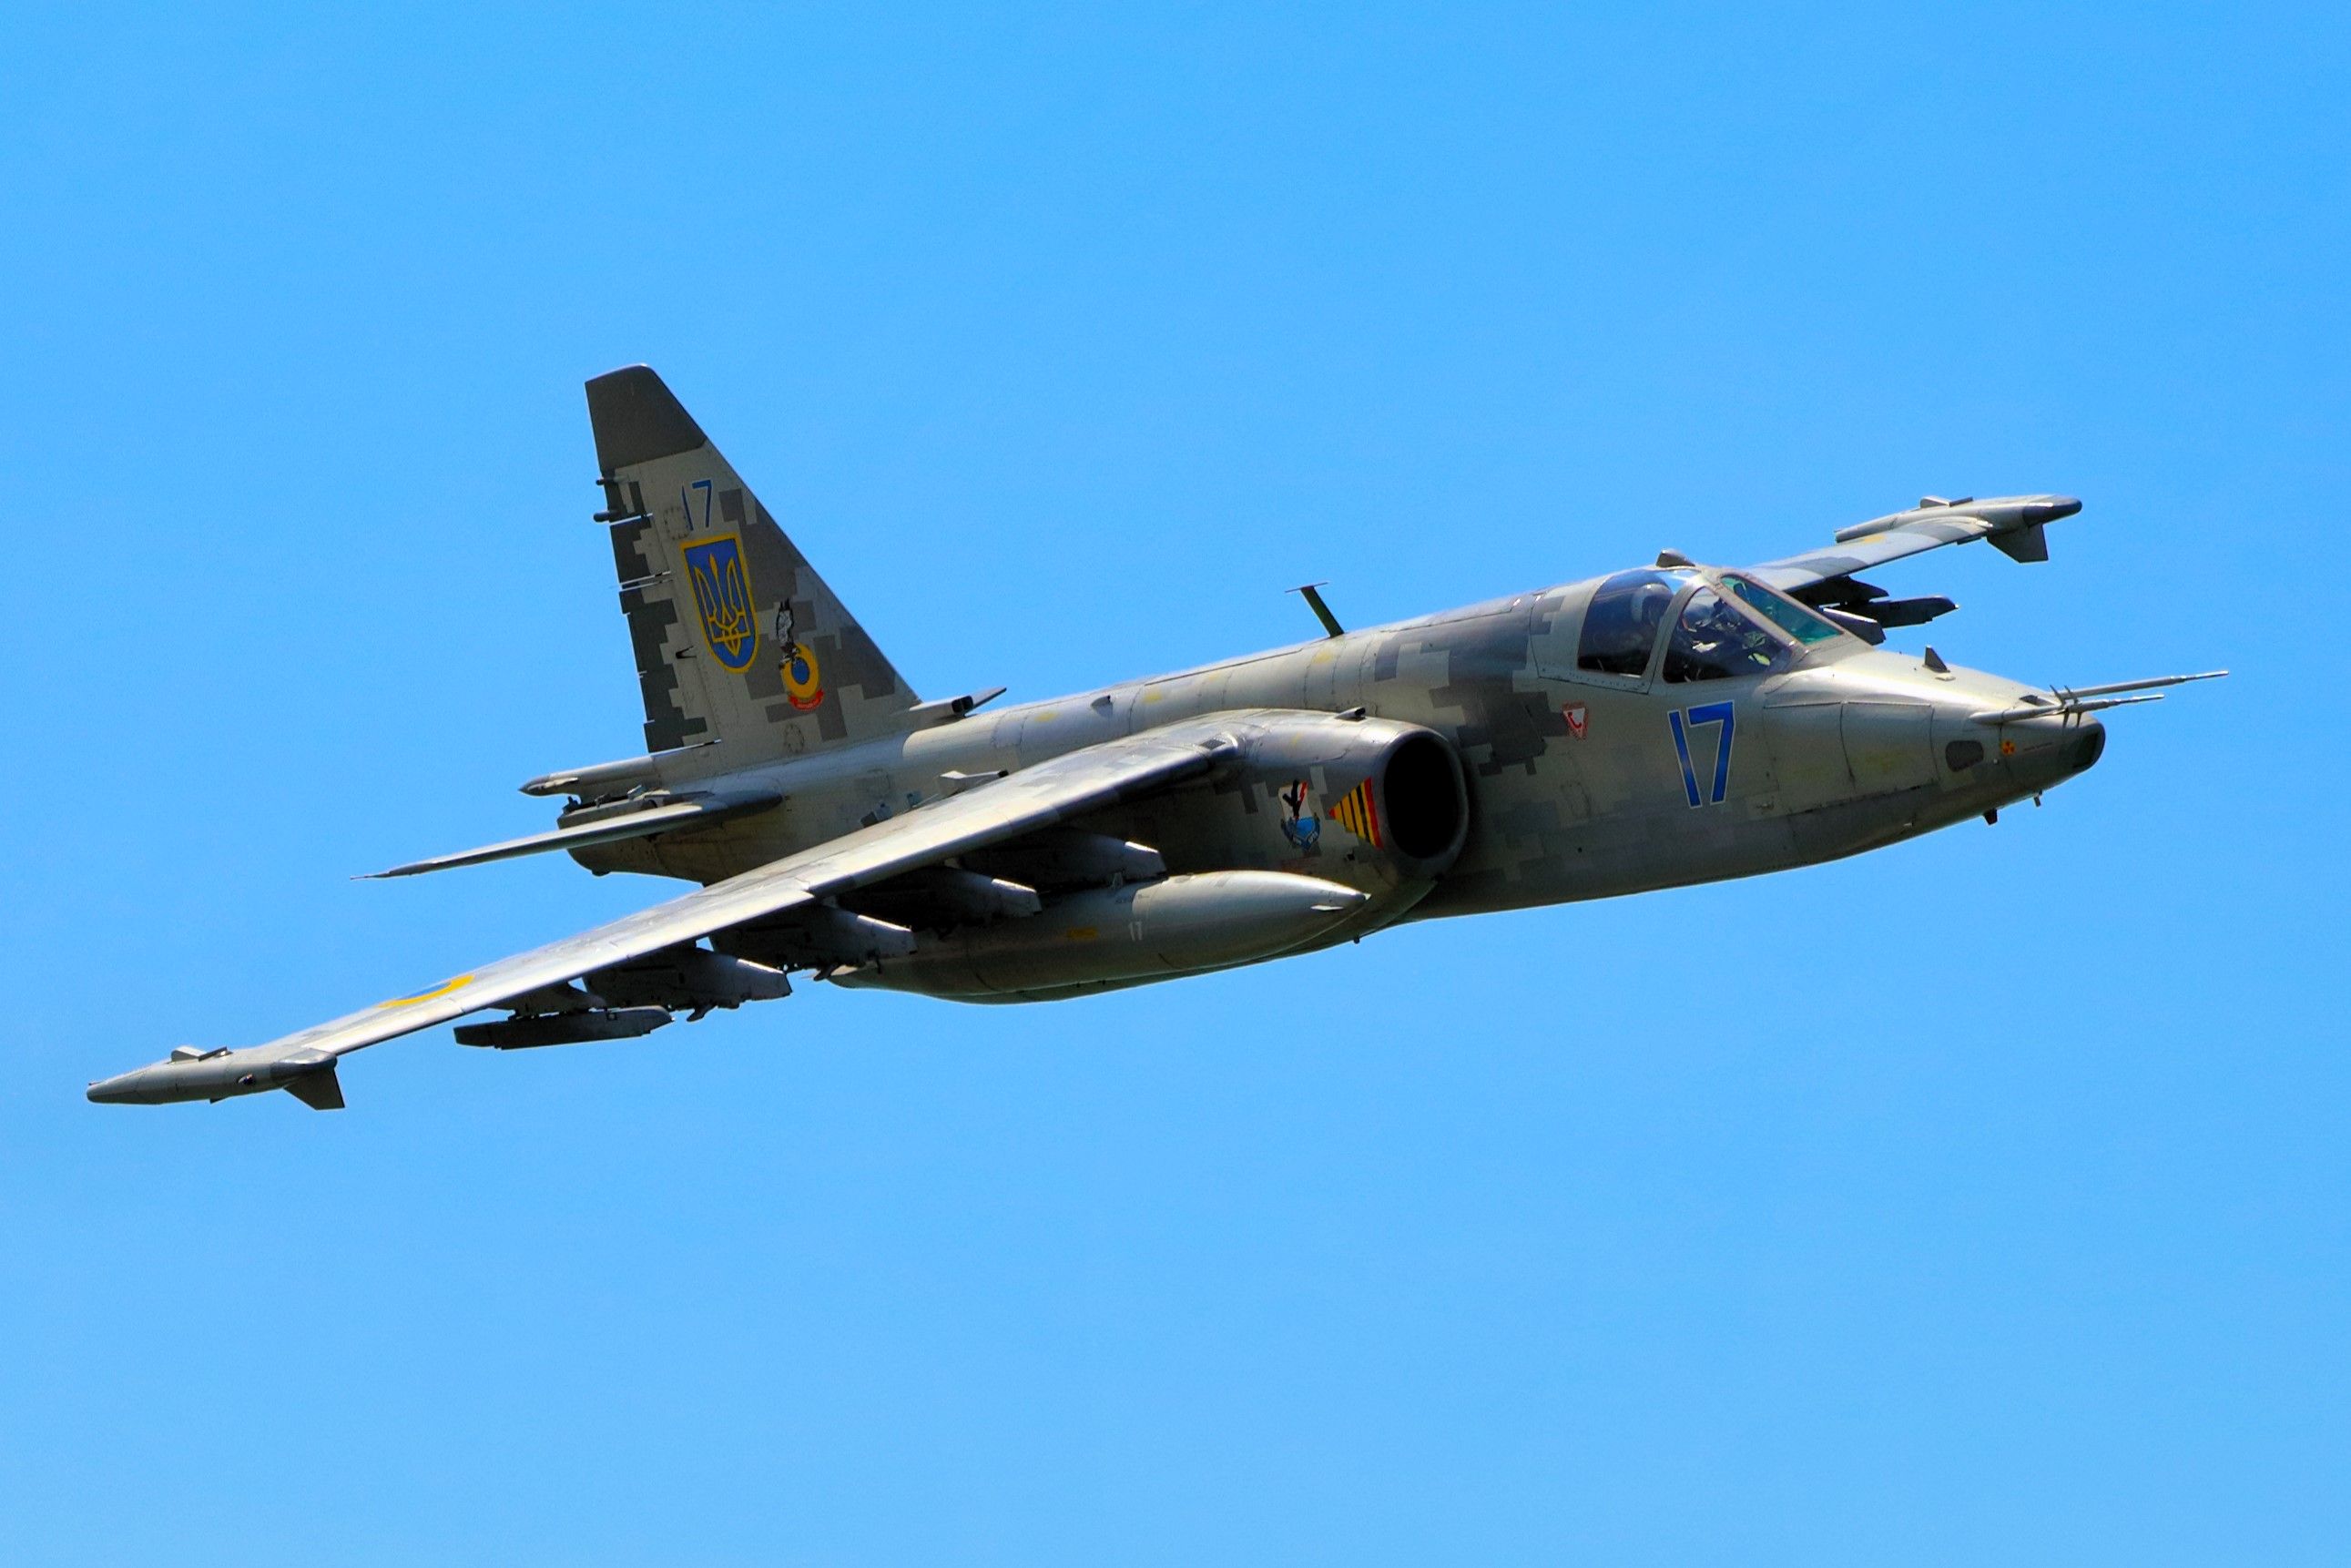 A Ukrainian Air Force Sukhoi Su-25 flying in the sky.